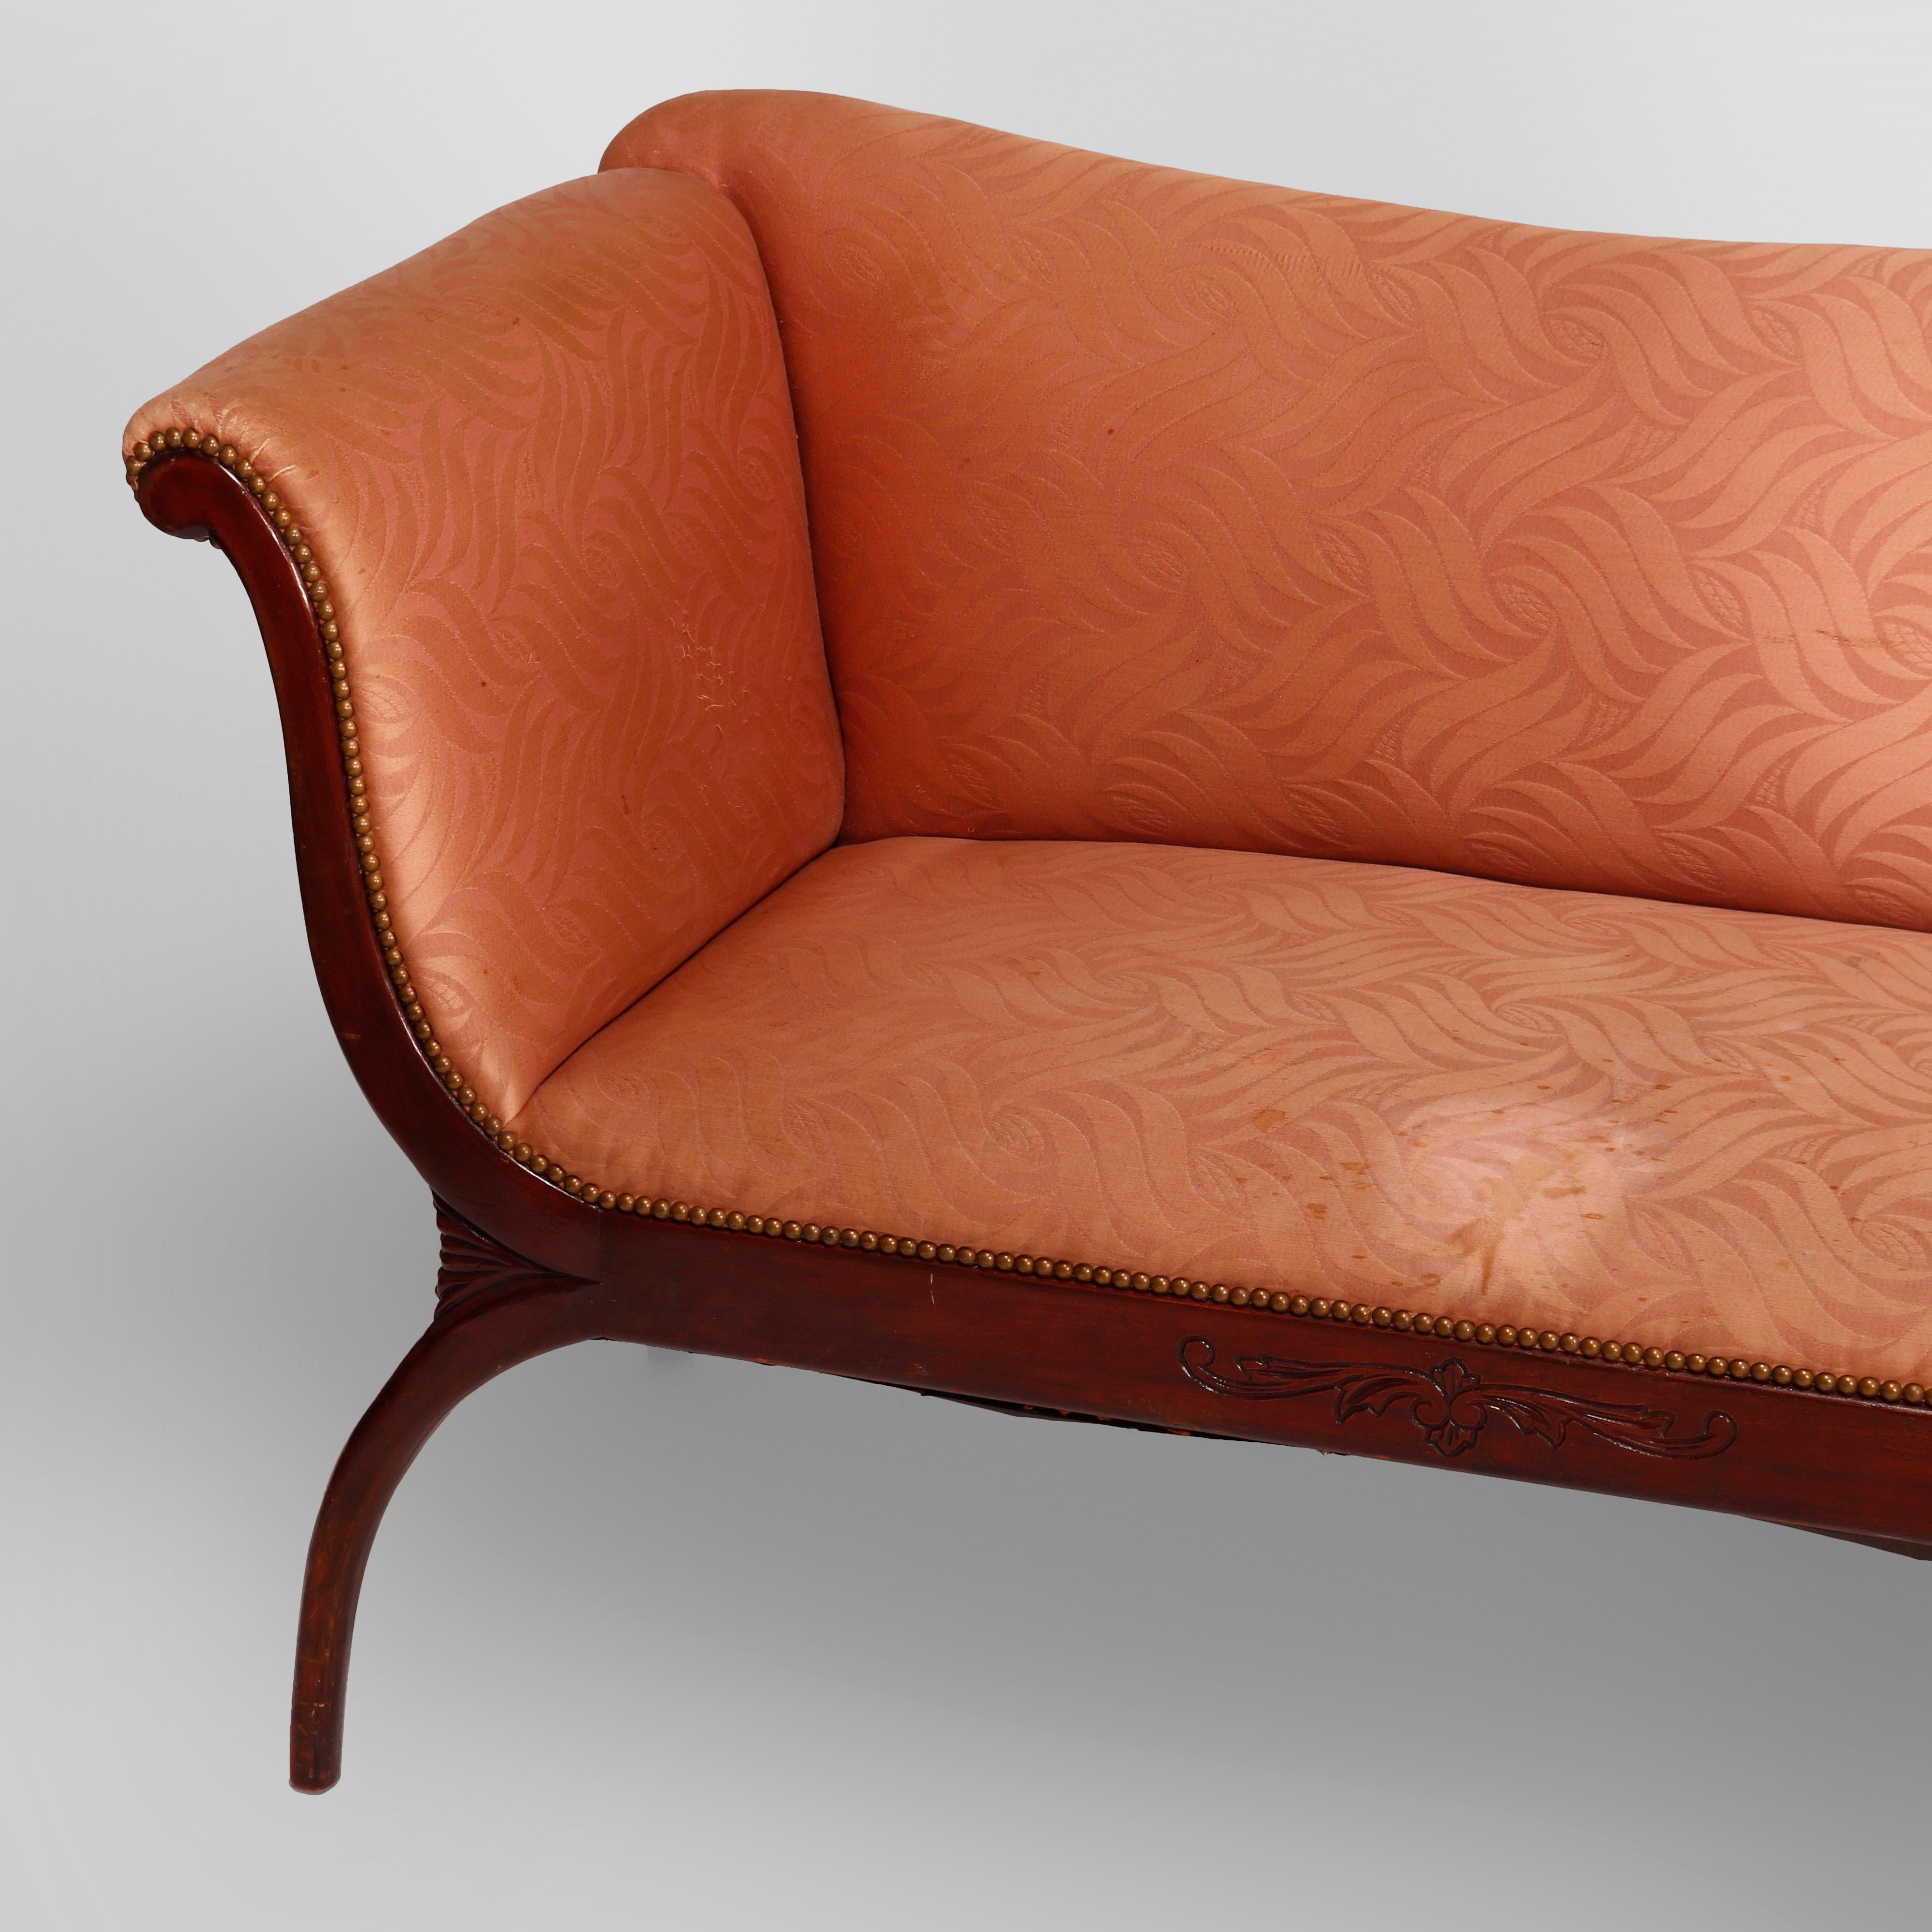 20th Century Antique Classical Continental Carved Mahogany Upholstered Settee, Circa 1920 For Sale